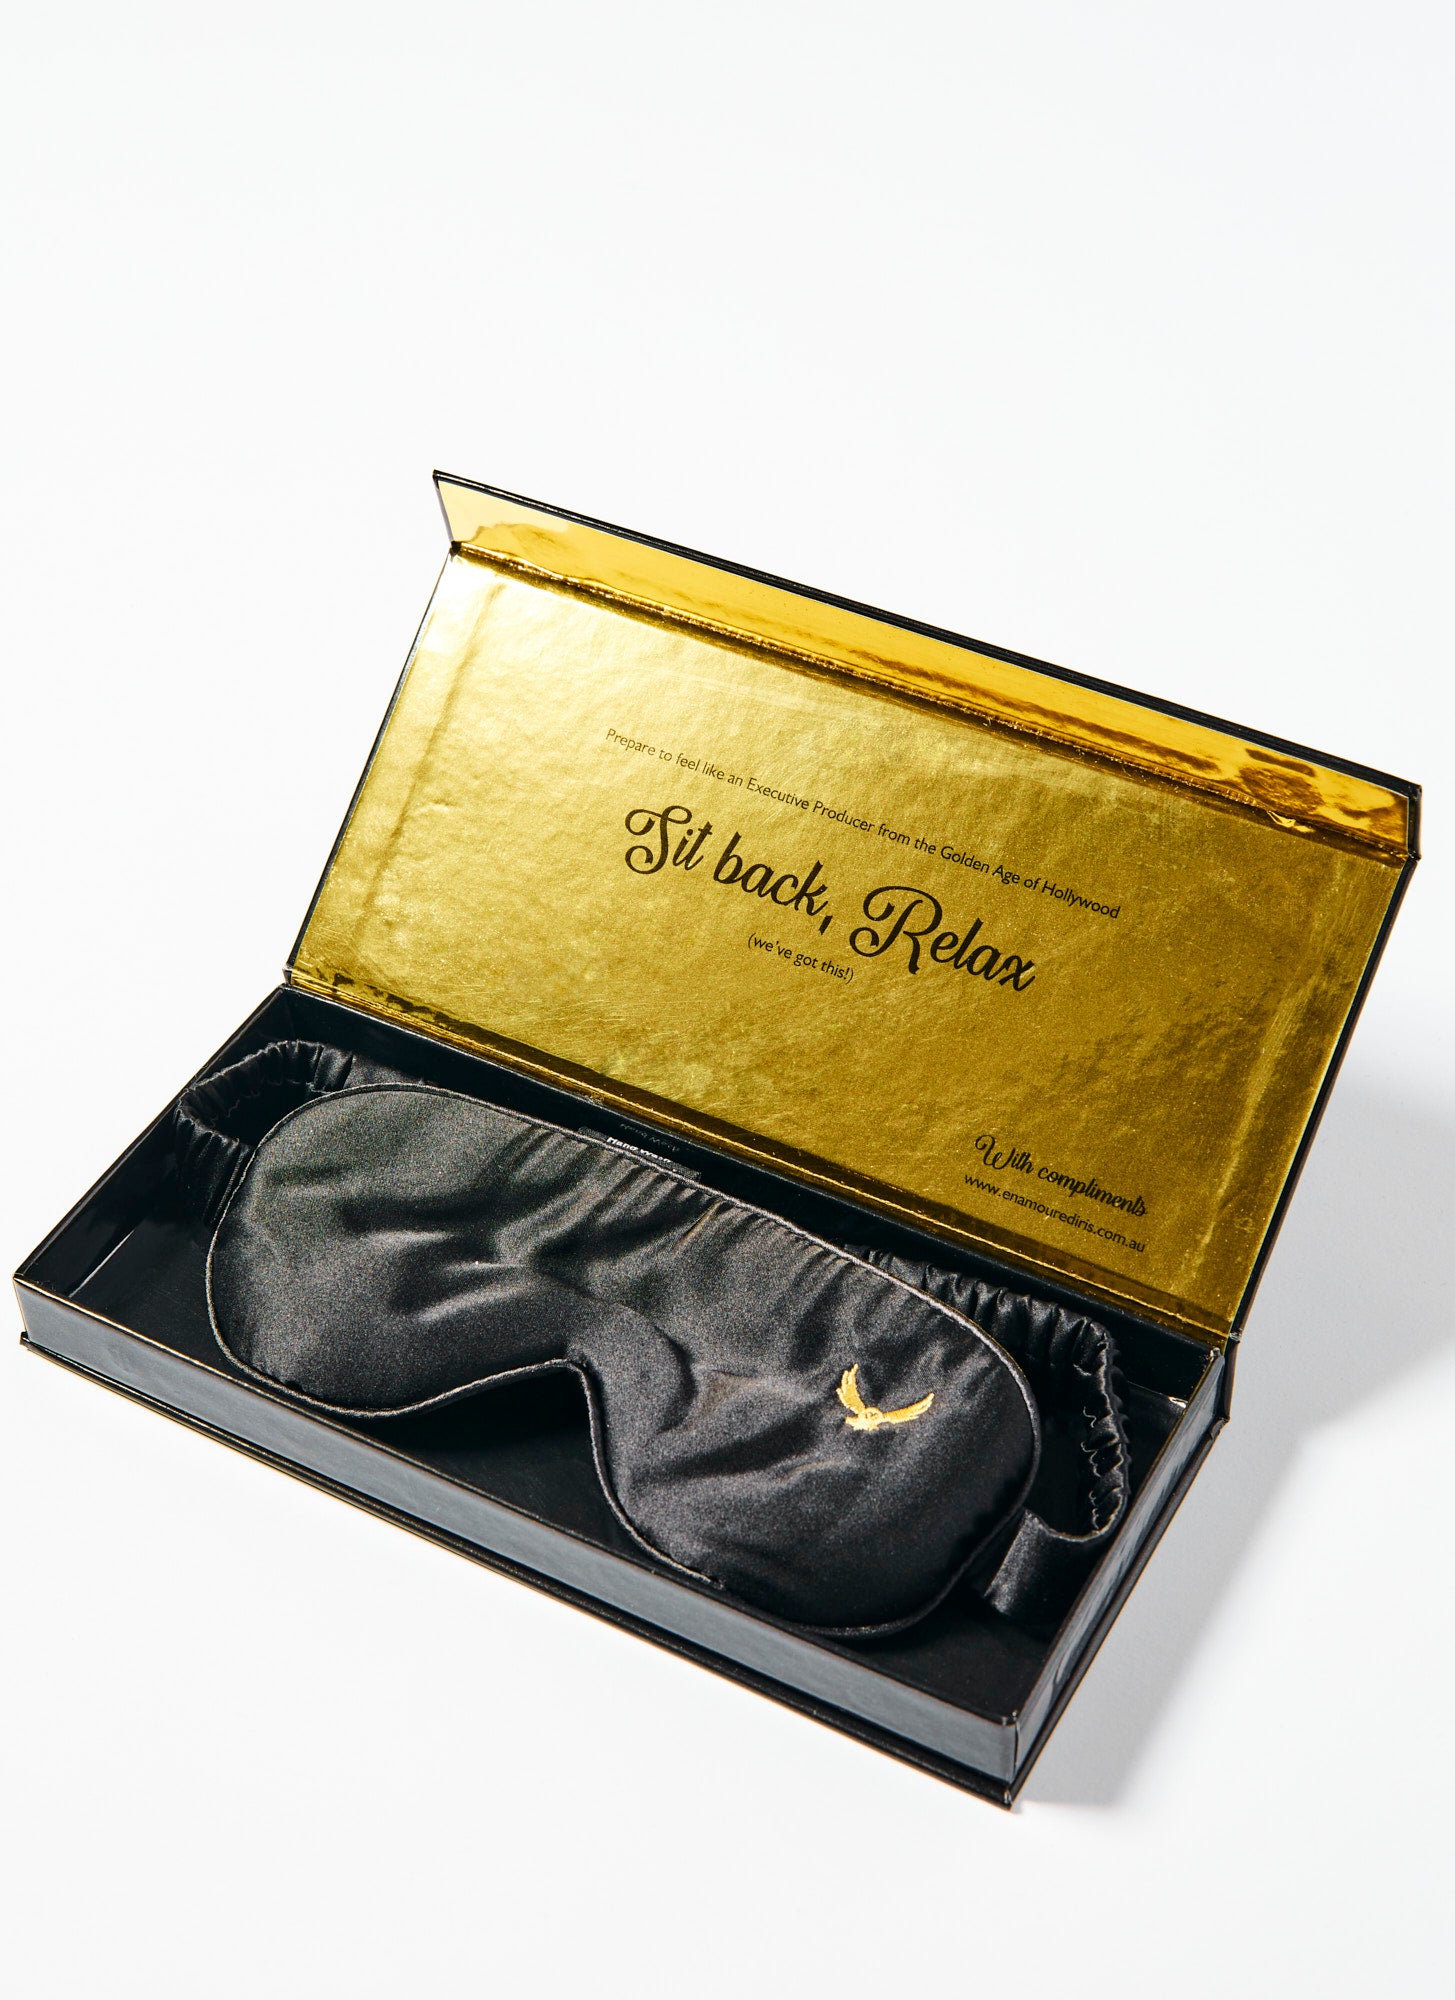 A luxurious, 100% silk black eye mask in a box from Melbourne video production company Enamoured Iris